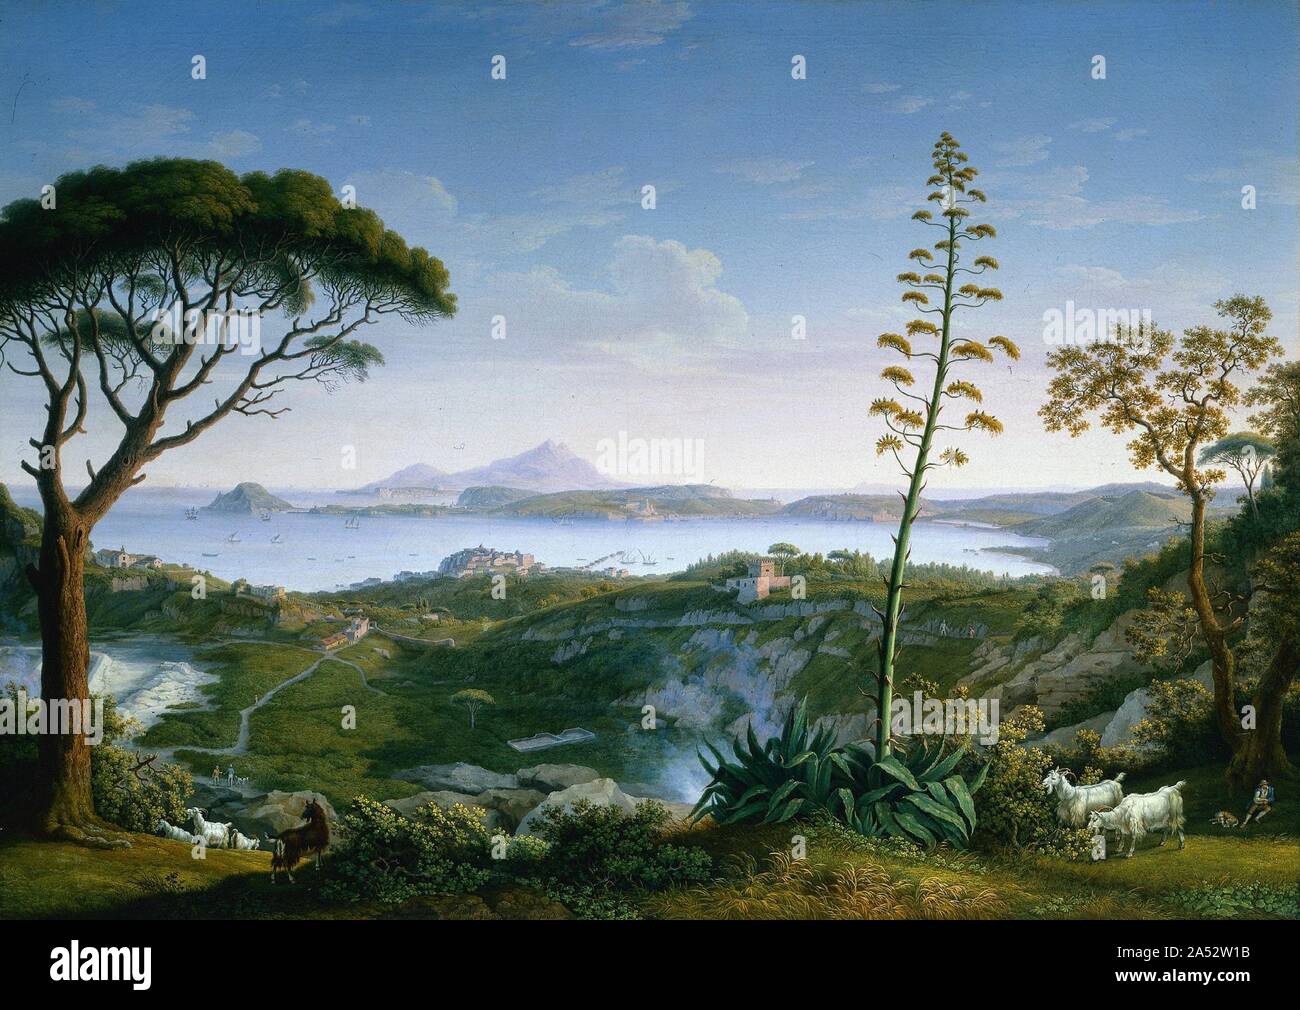 View of the Gulf of Pozzuoli from Solfatara, 1803. Attracted to its dramatic vistas, volcanoes, exotic peasants, and classical ruins, landscape painters of the 1700s and 1800s flocked to the countryside around Naples. This view looks west toward the Gulf of Pozzuoli from just above the Solfatara, an area of volcanic steam vents. The ancient town of Pozzuoli, where the apostle Paul landed on his way to Rome, lies in the distance. Hackert's attention to detail and rendering of form with extreme lucidity is characteristic of German Romantic painting. Stock Photo